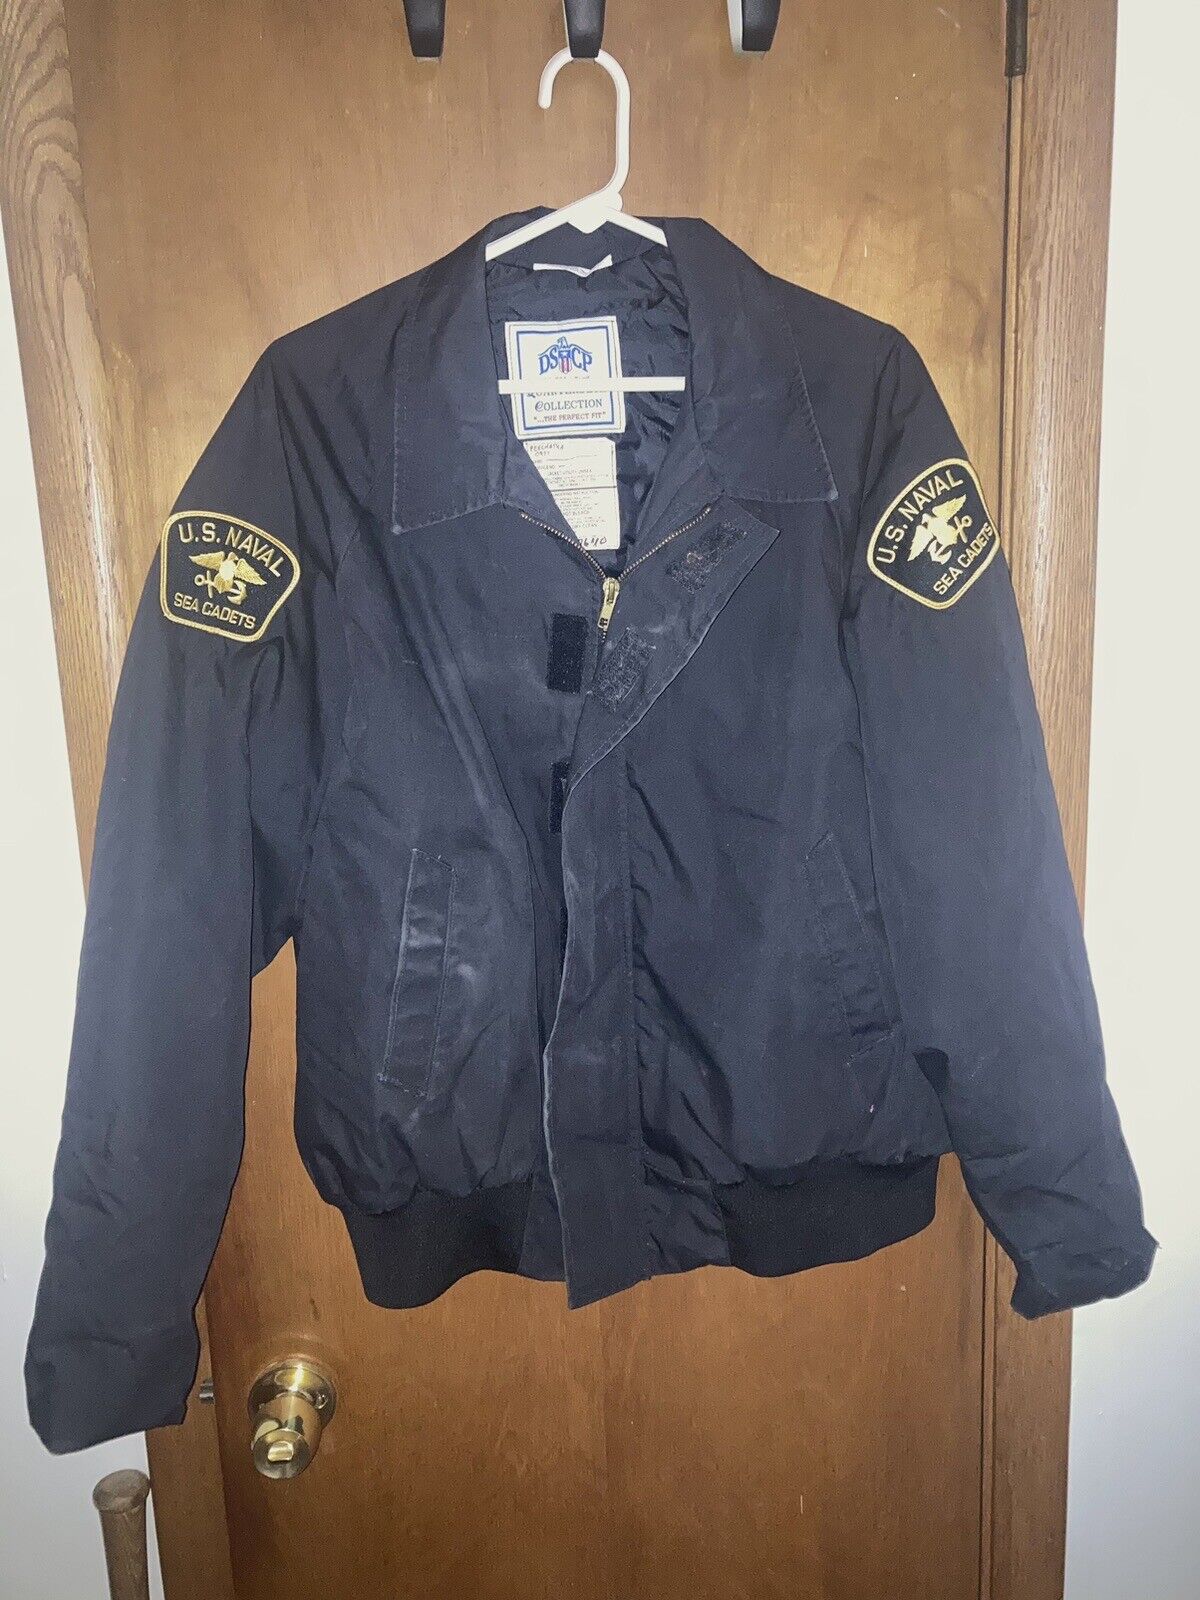 US Naval Sea Cadets Jacket With Insignia and Patches Sz Large.